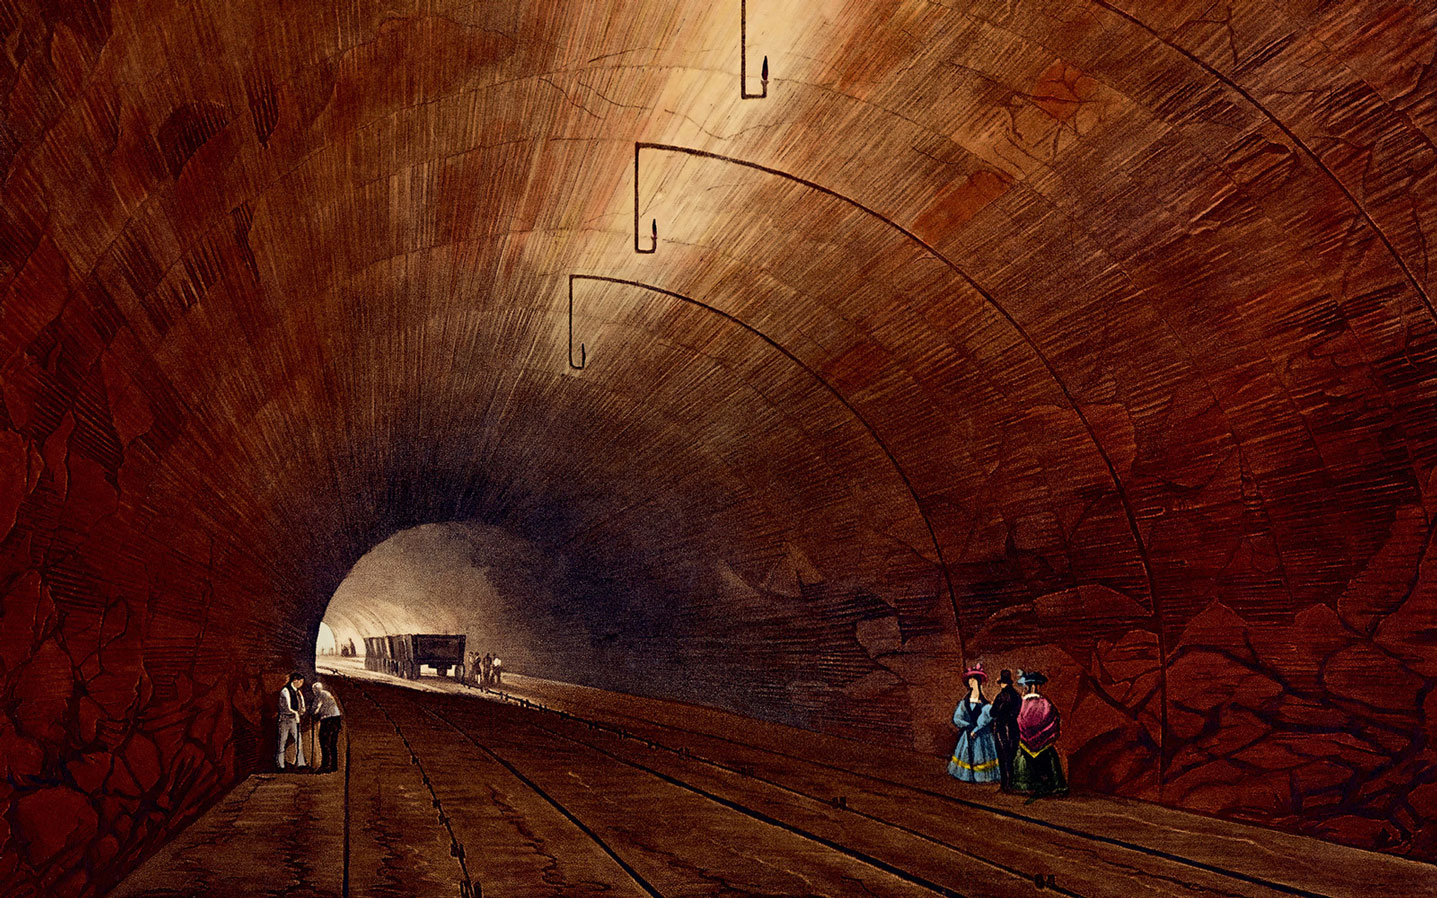 An illustration of the tunnel under Edge Hill from Thomas Talbot Bury’s eighteen thirty-one work titled “Coloured views on the Liverpool and Manchester Railway.” 